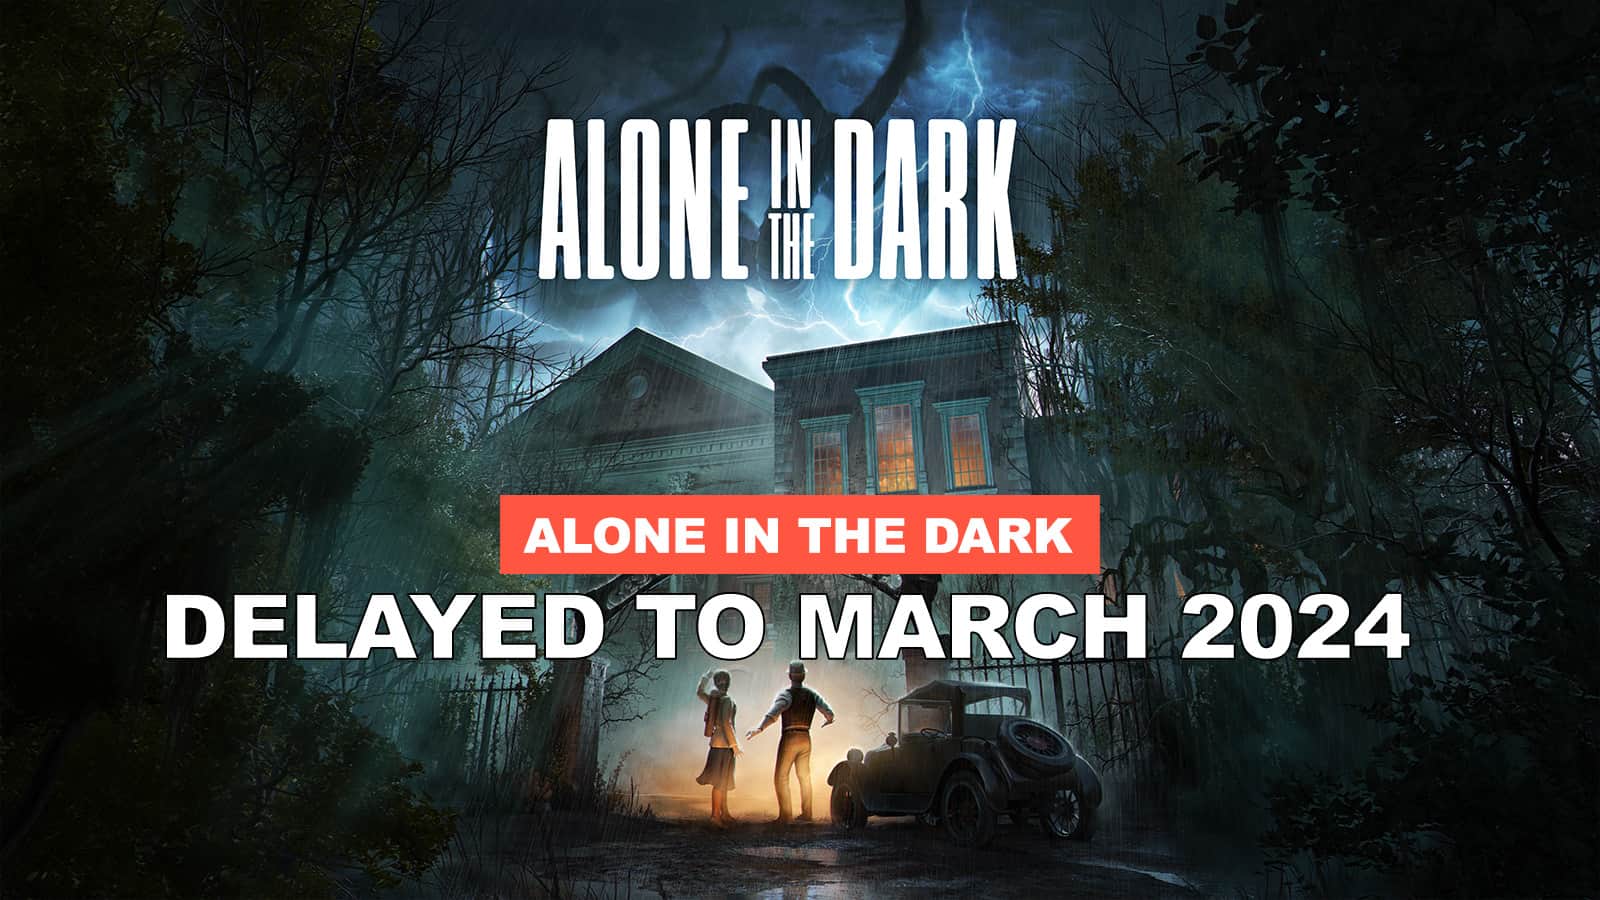 Alone In The Dark Delayed To March 2024 To Avoid Christmas Crunch